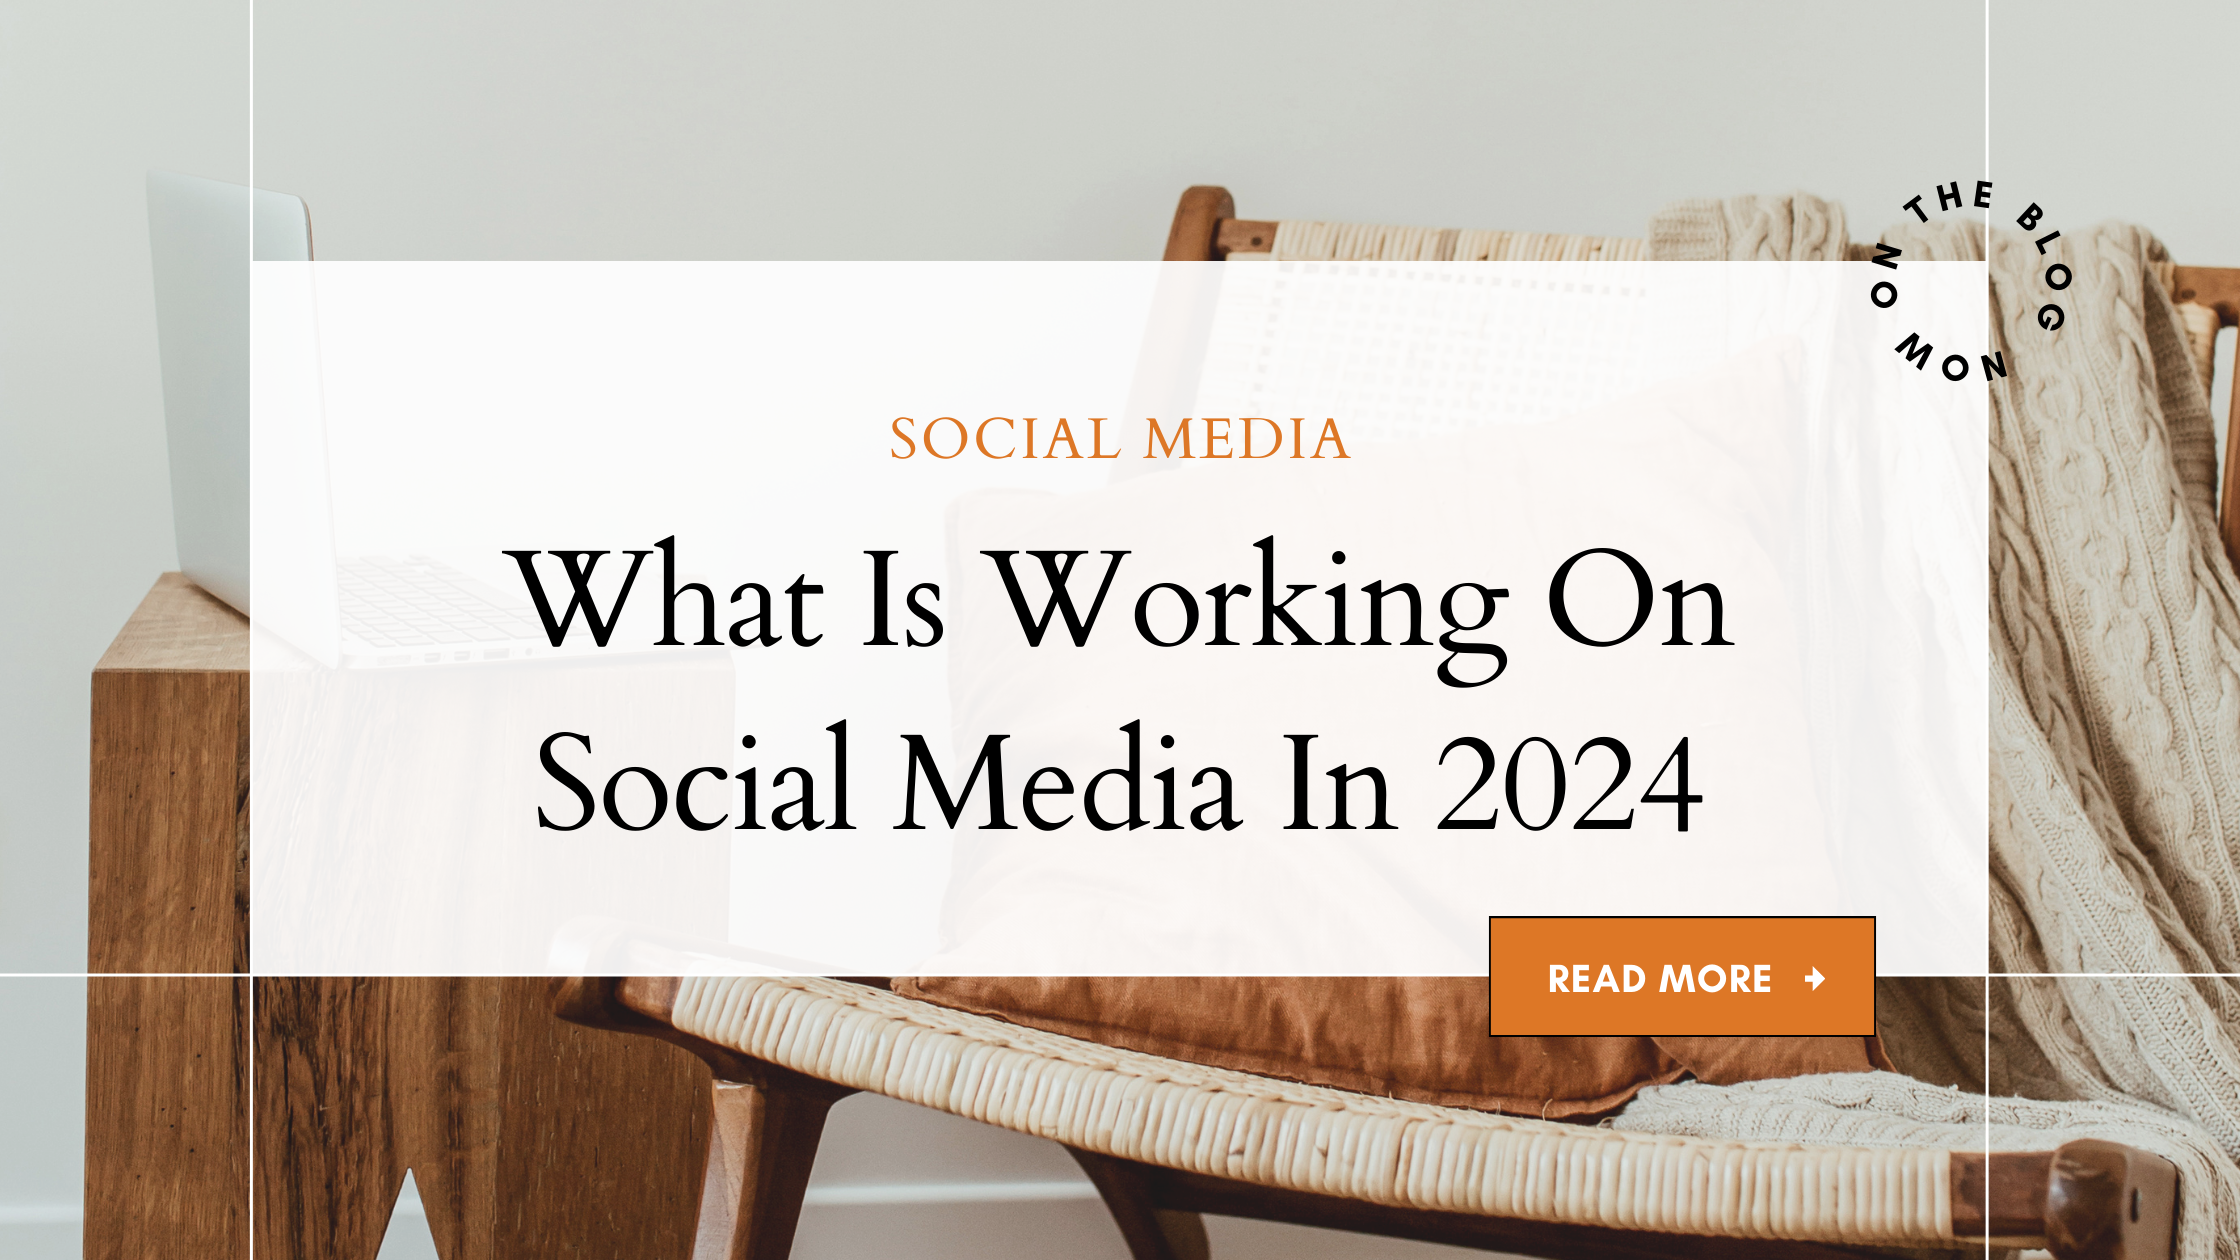 What is working on social media in 2024